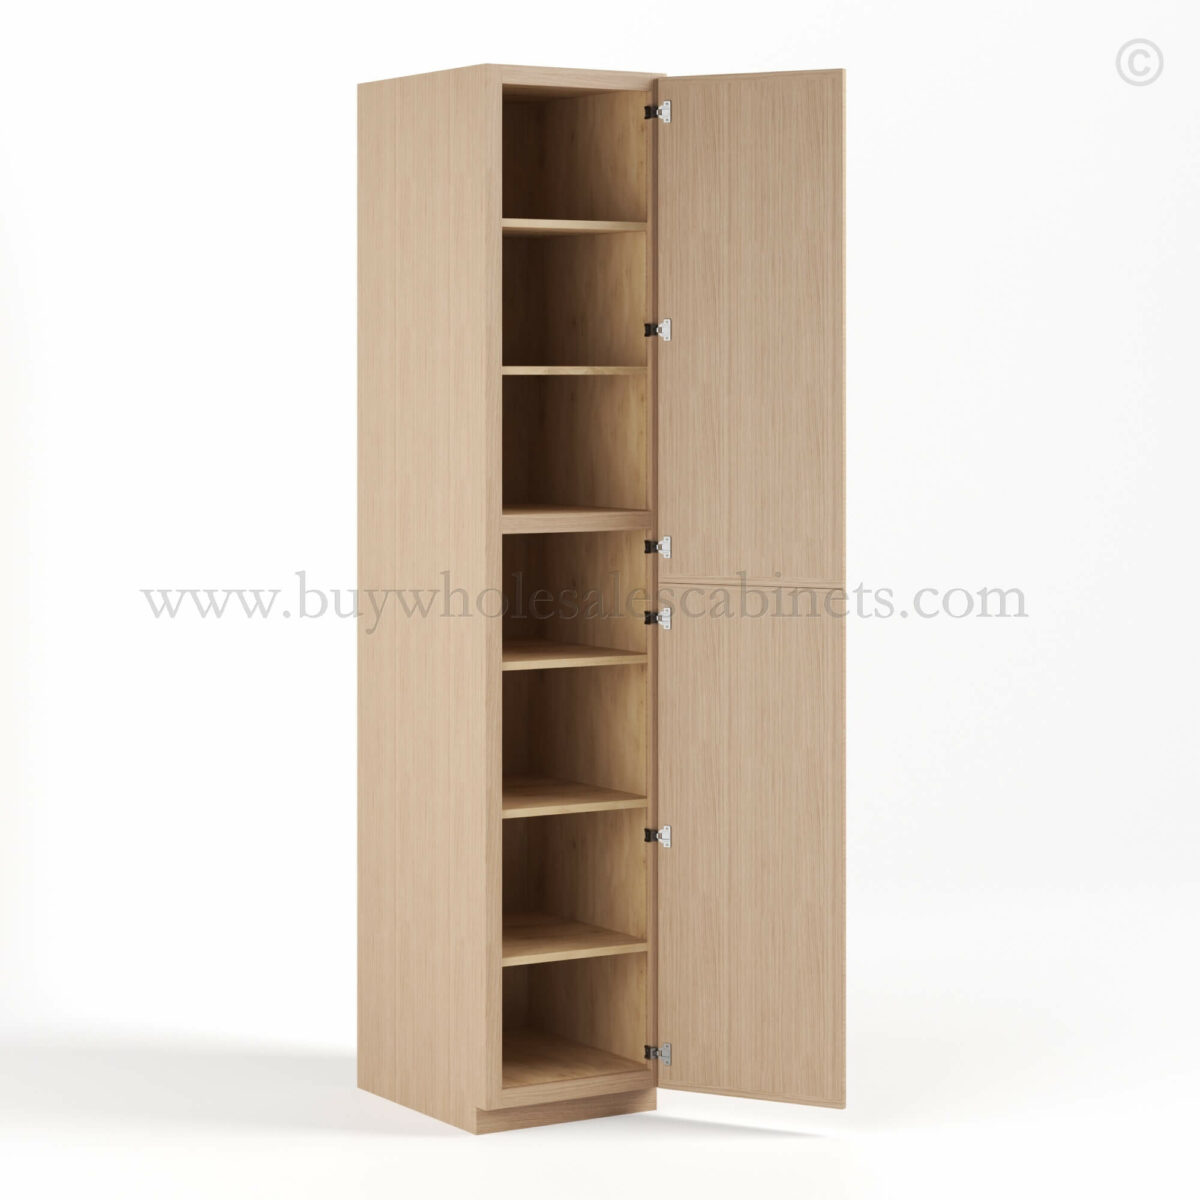 Slim Oak Shaker Tall Pantry Cabinet with 2 Doors, rta cabinets, wholesale cabinets